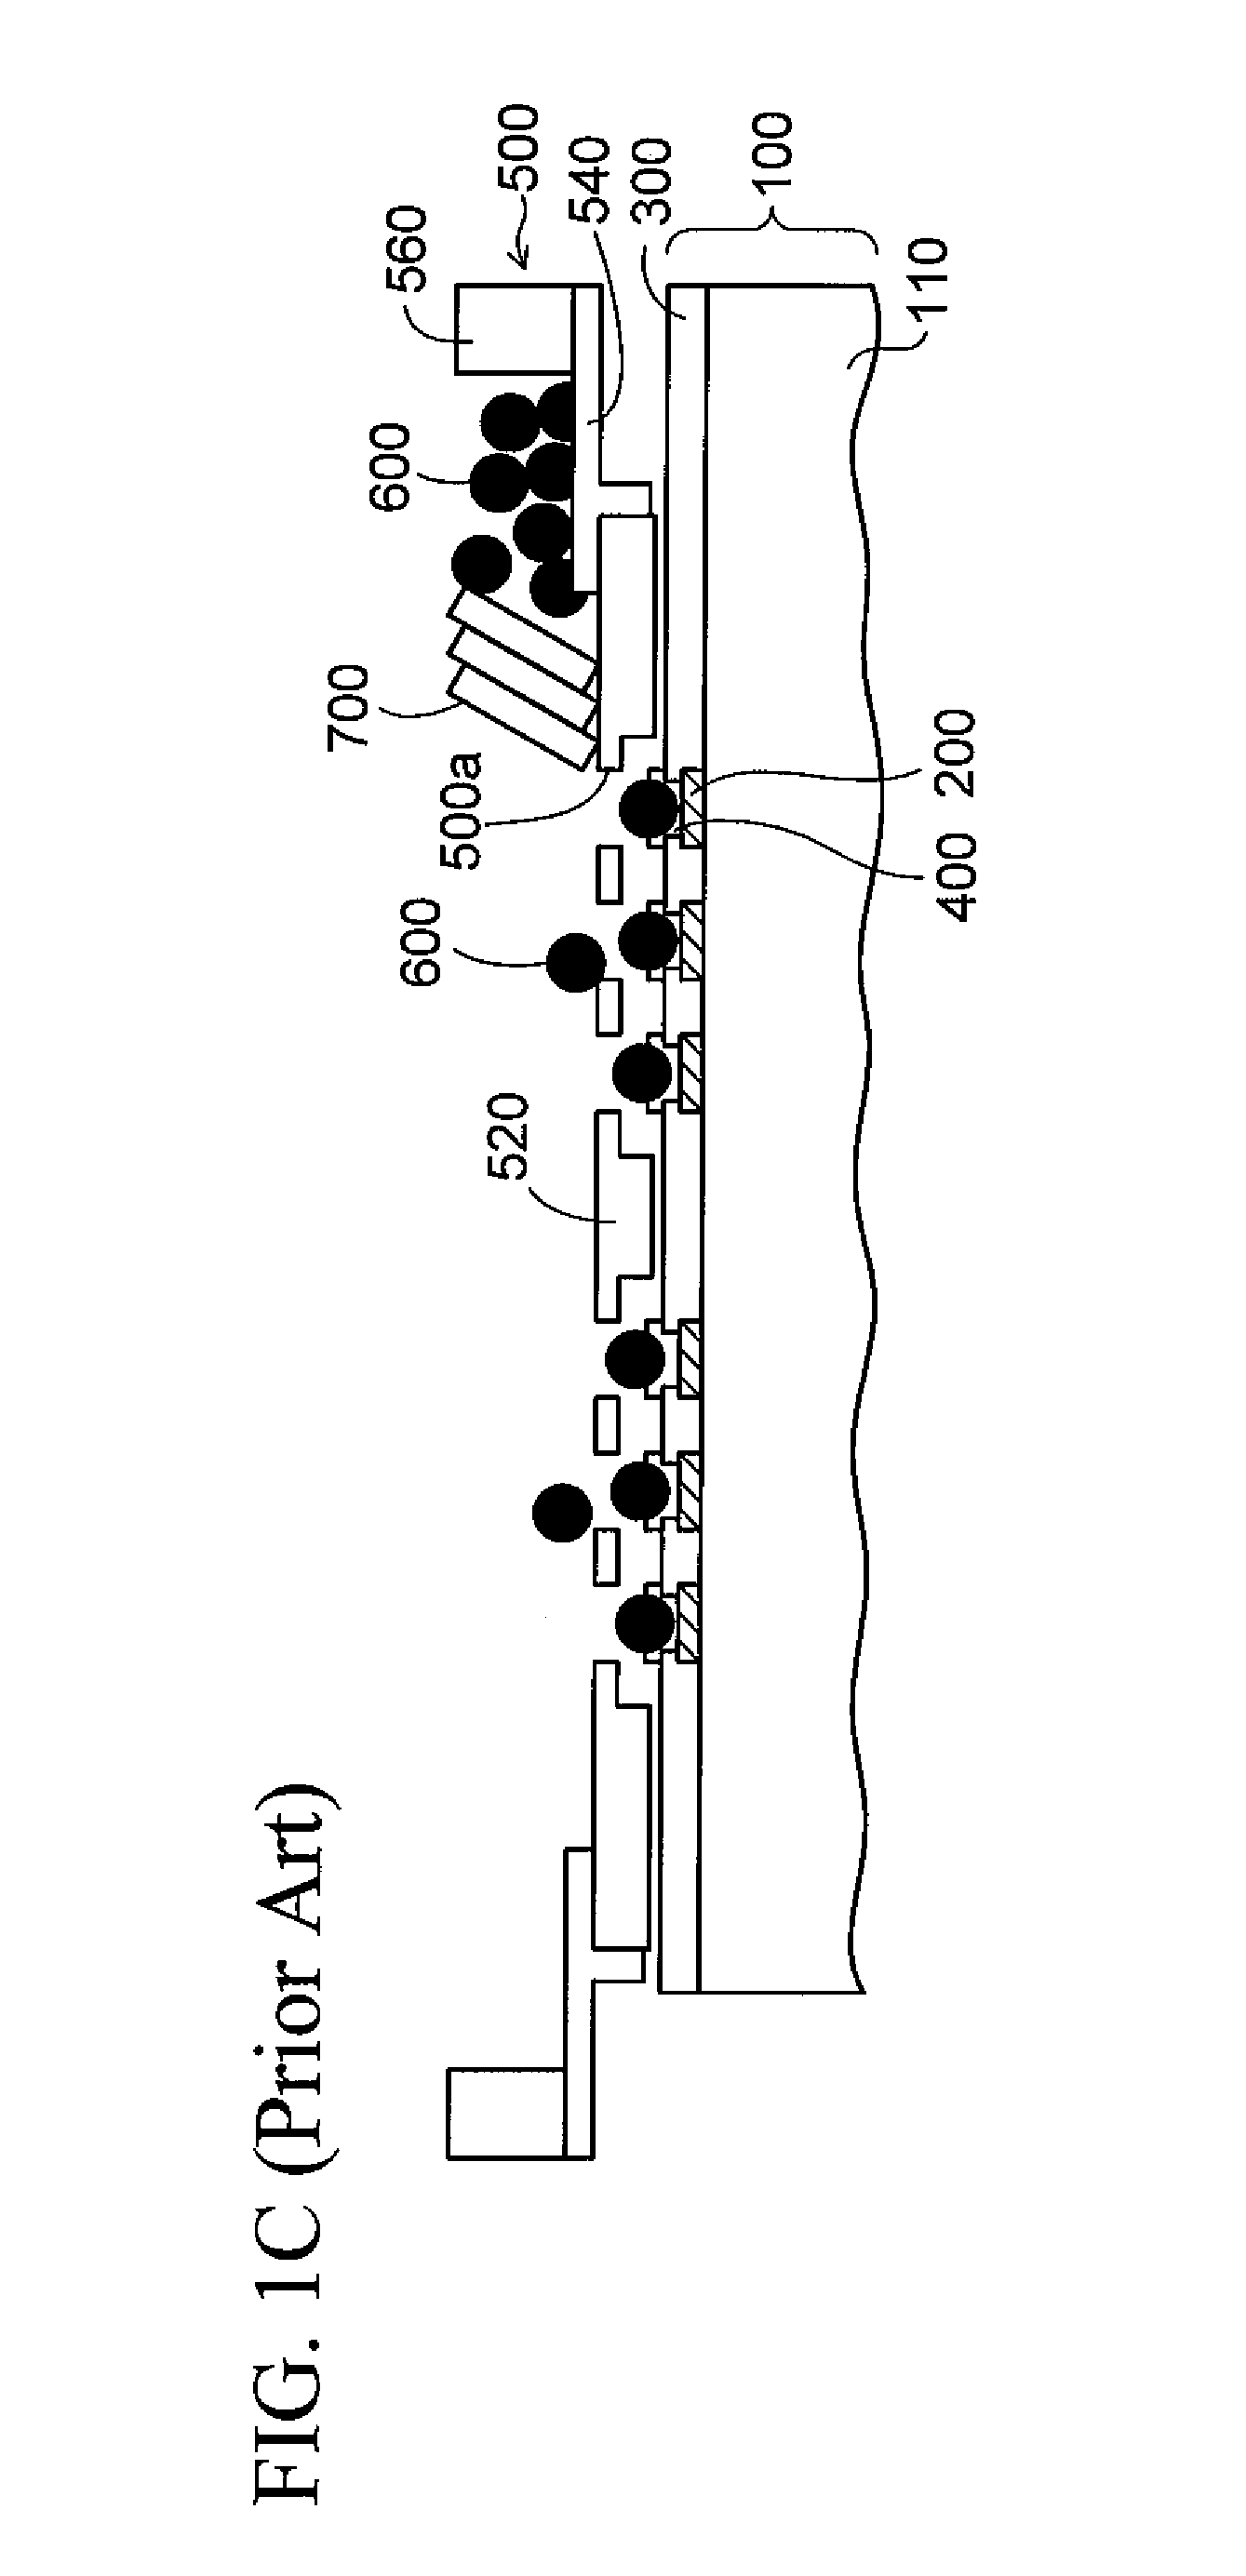 Method of mounting conductive ball and conductive ball mounting apparatus